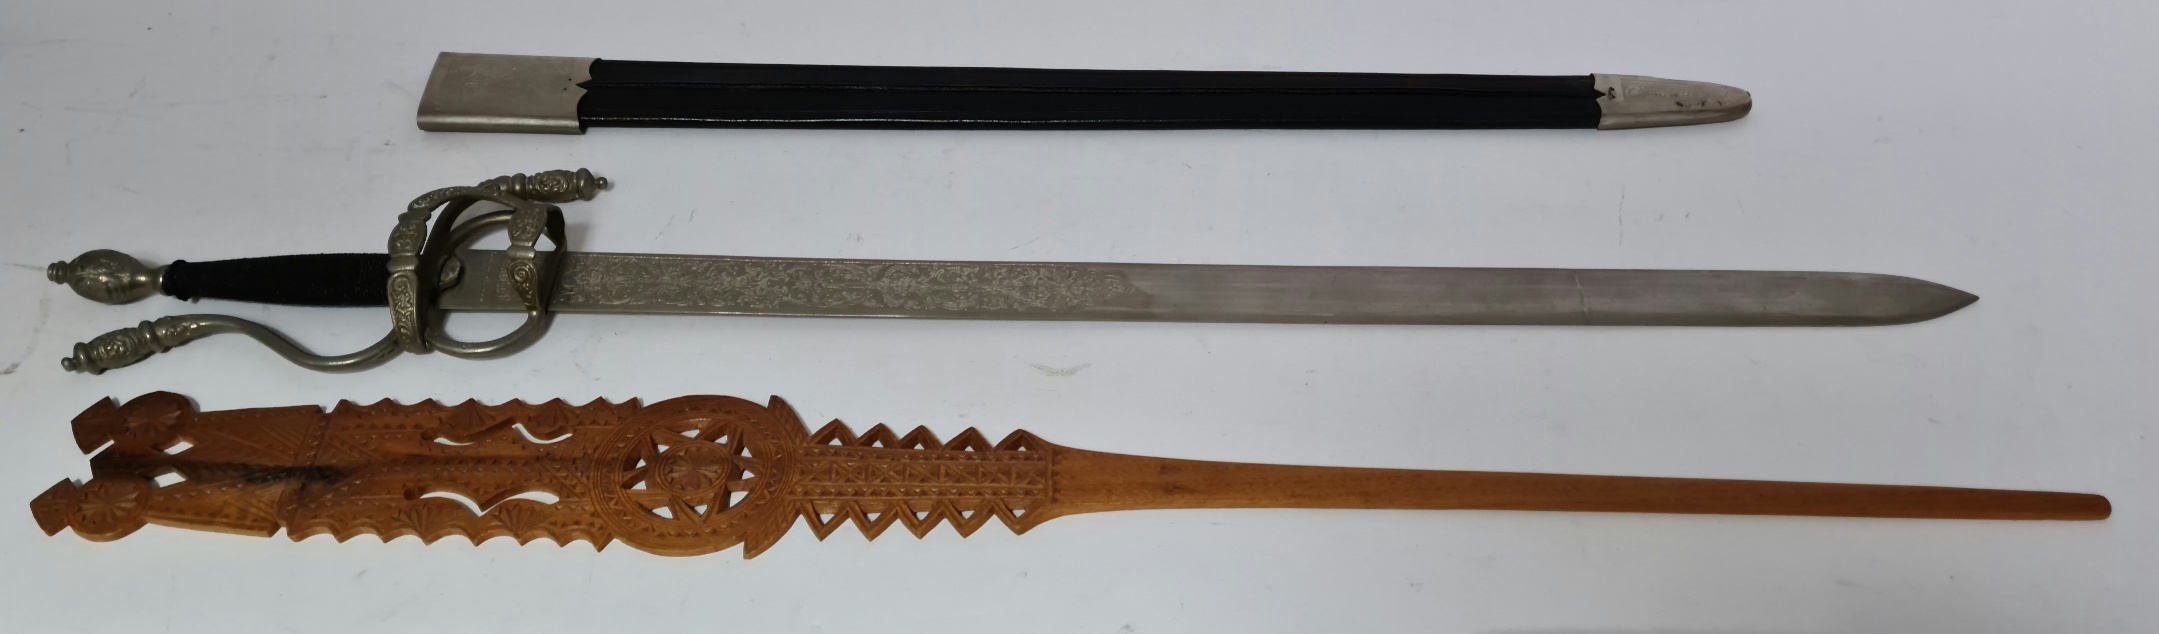 A reproduction Toledo steel sword and a carved wooden wool comb.